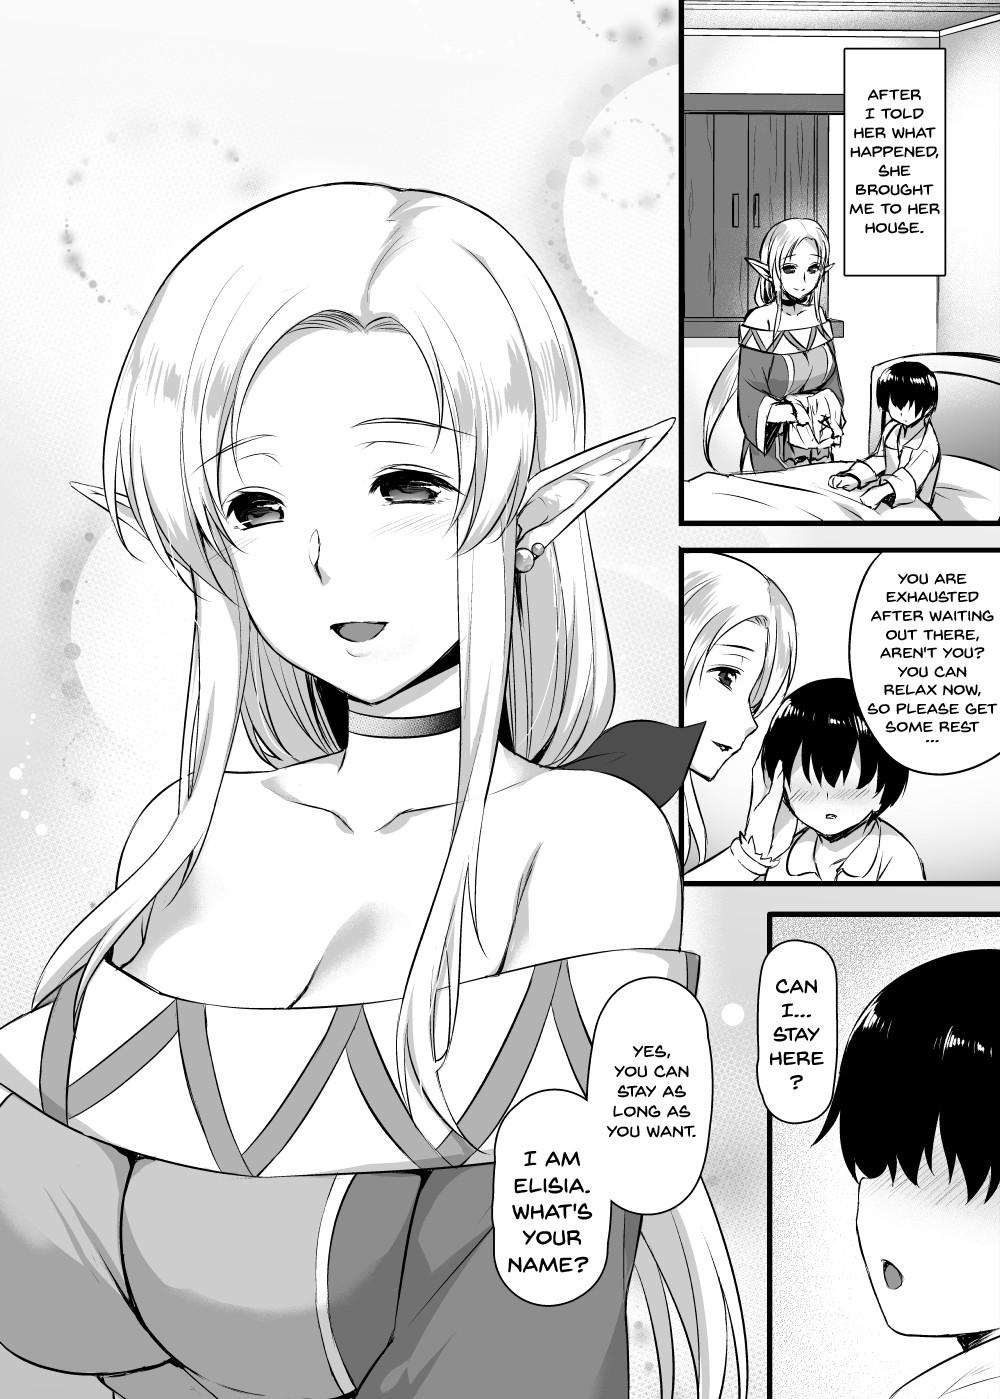 Hentai Manga Comic-Elf's Mom ~She Gets Raped By Orcs In From Of Her Son~-Read-3